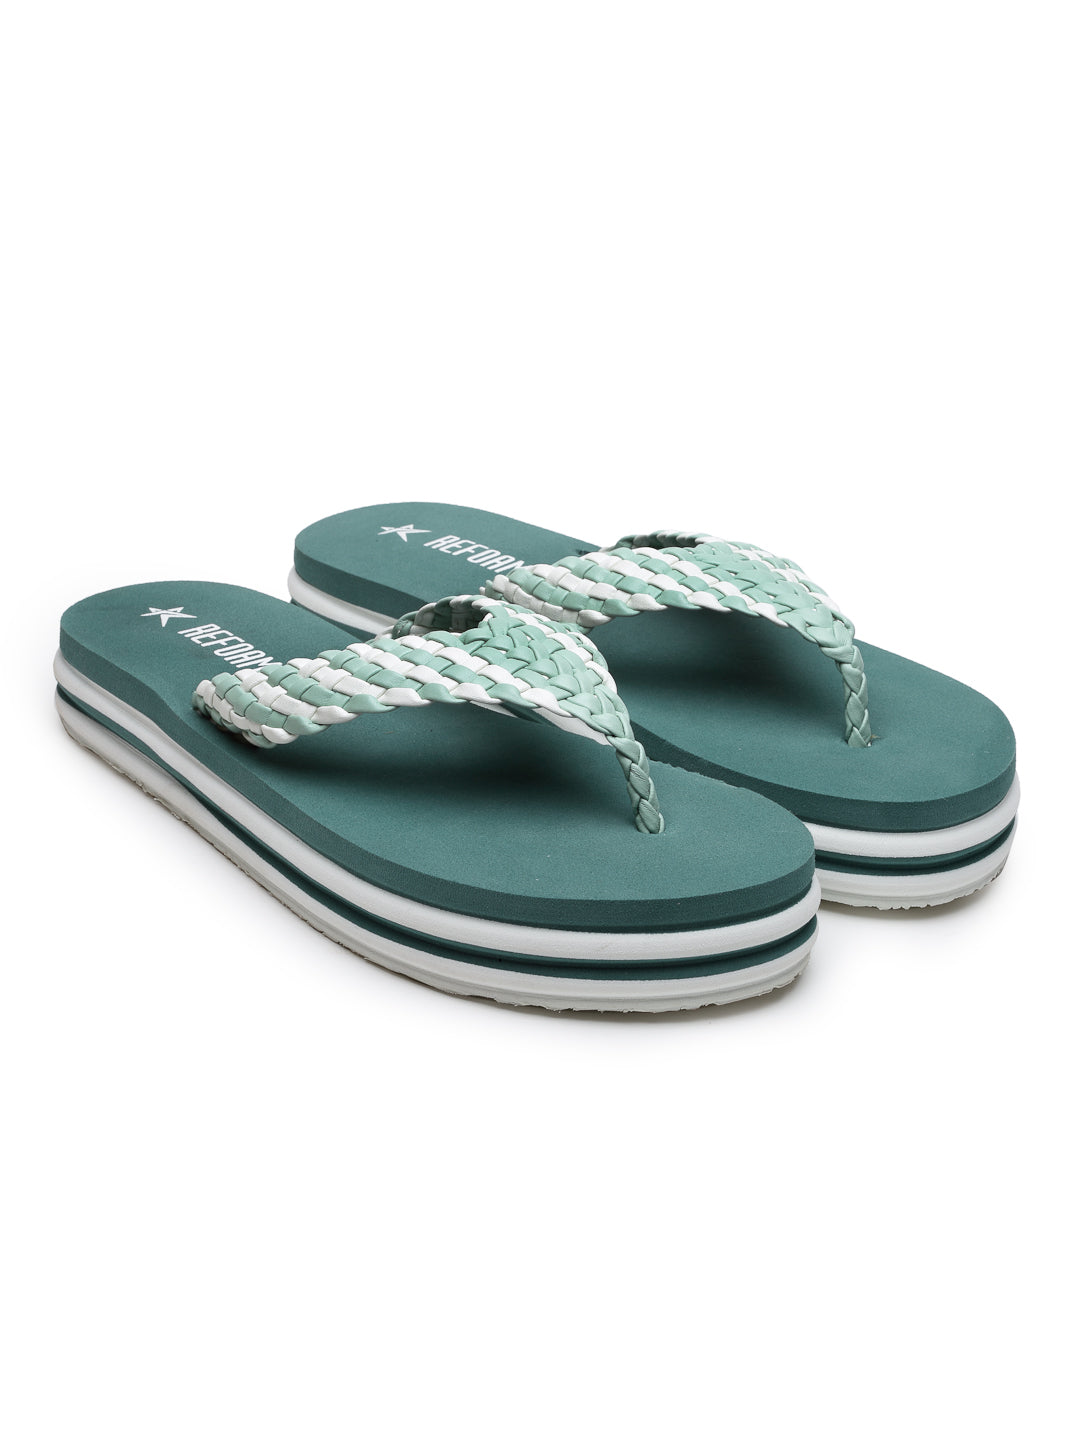 Green Solid PU Leather Slip On Casual Slippers For Women